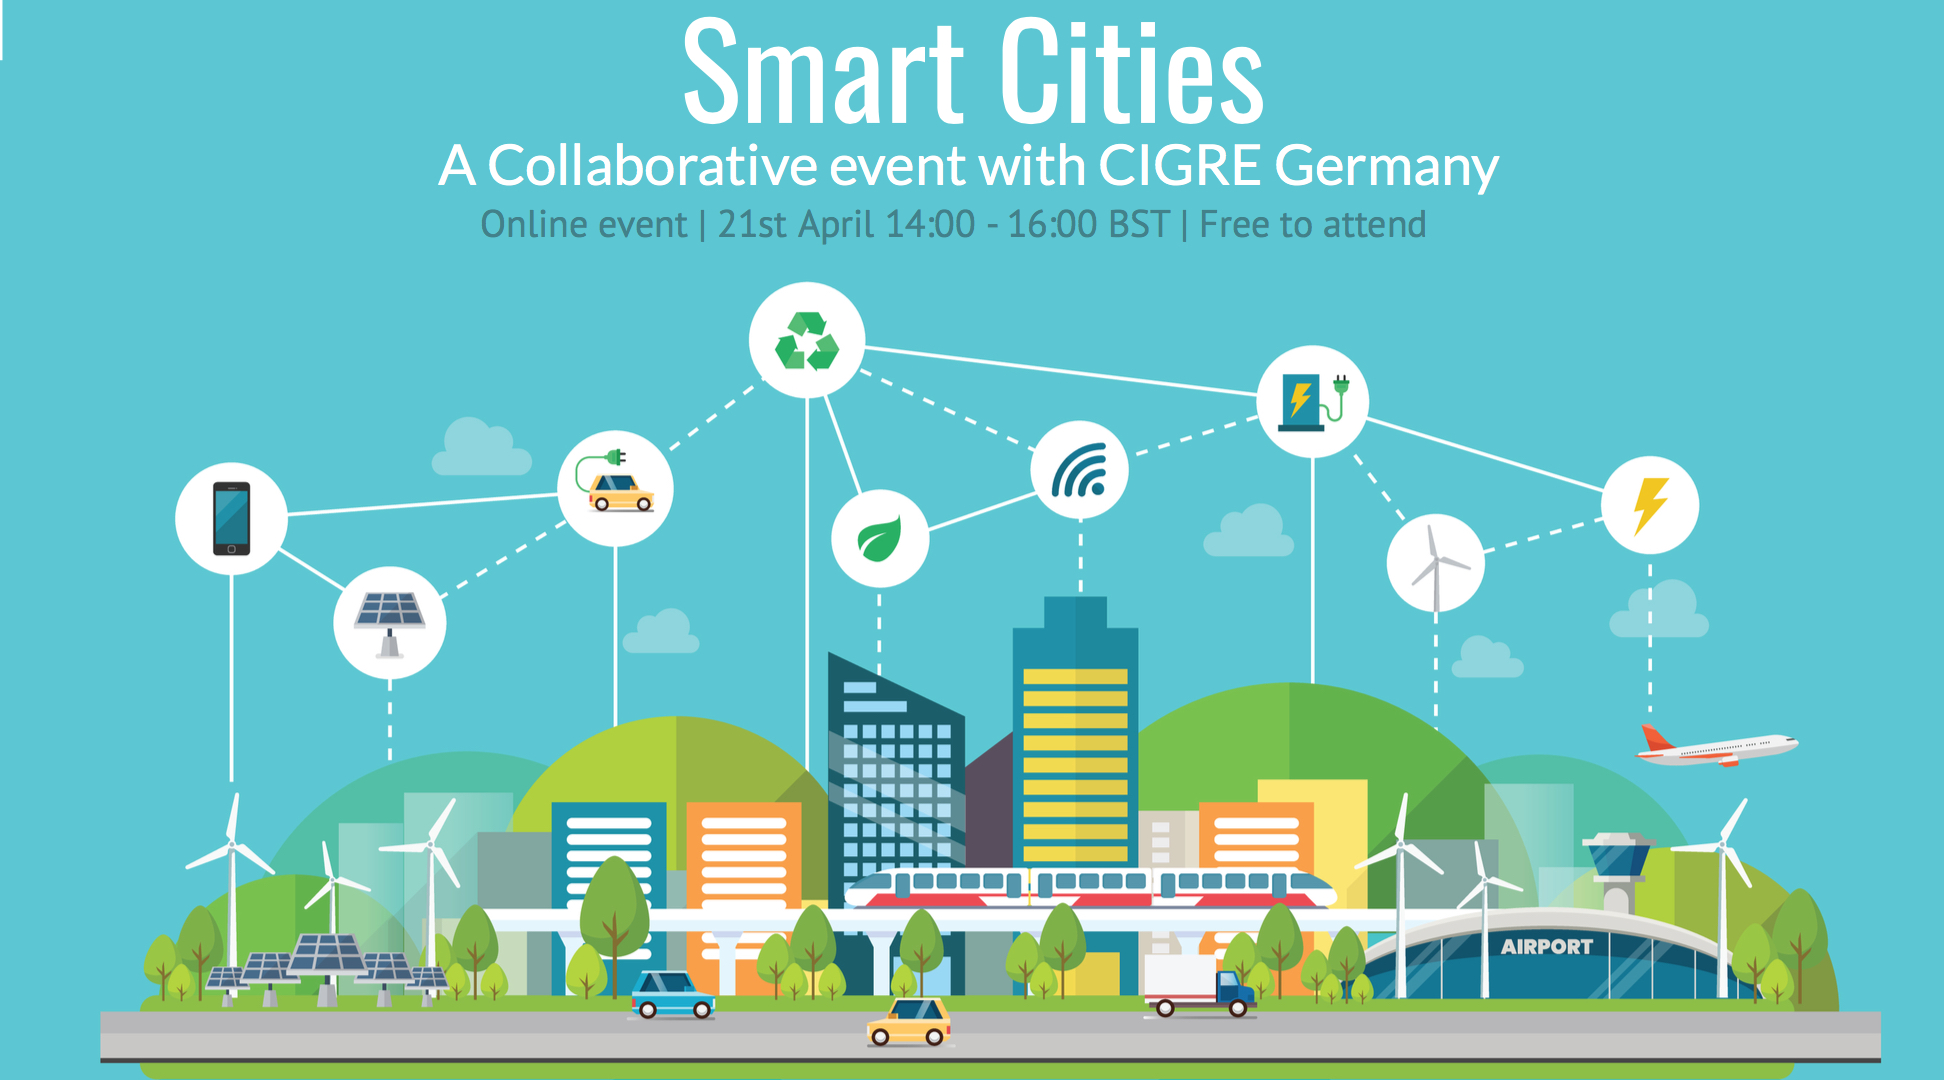 Smart Cities – A Collaborative event between CIGRE UK & CIGRE Germany